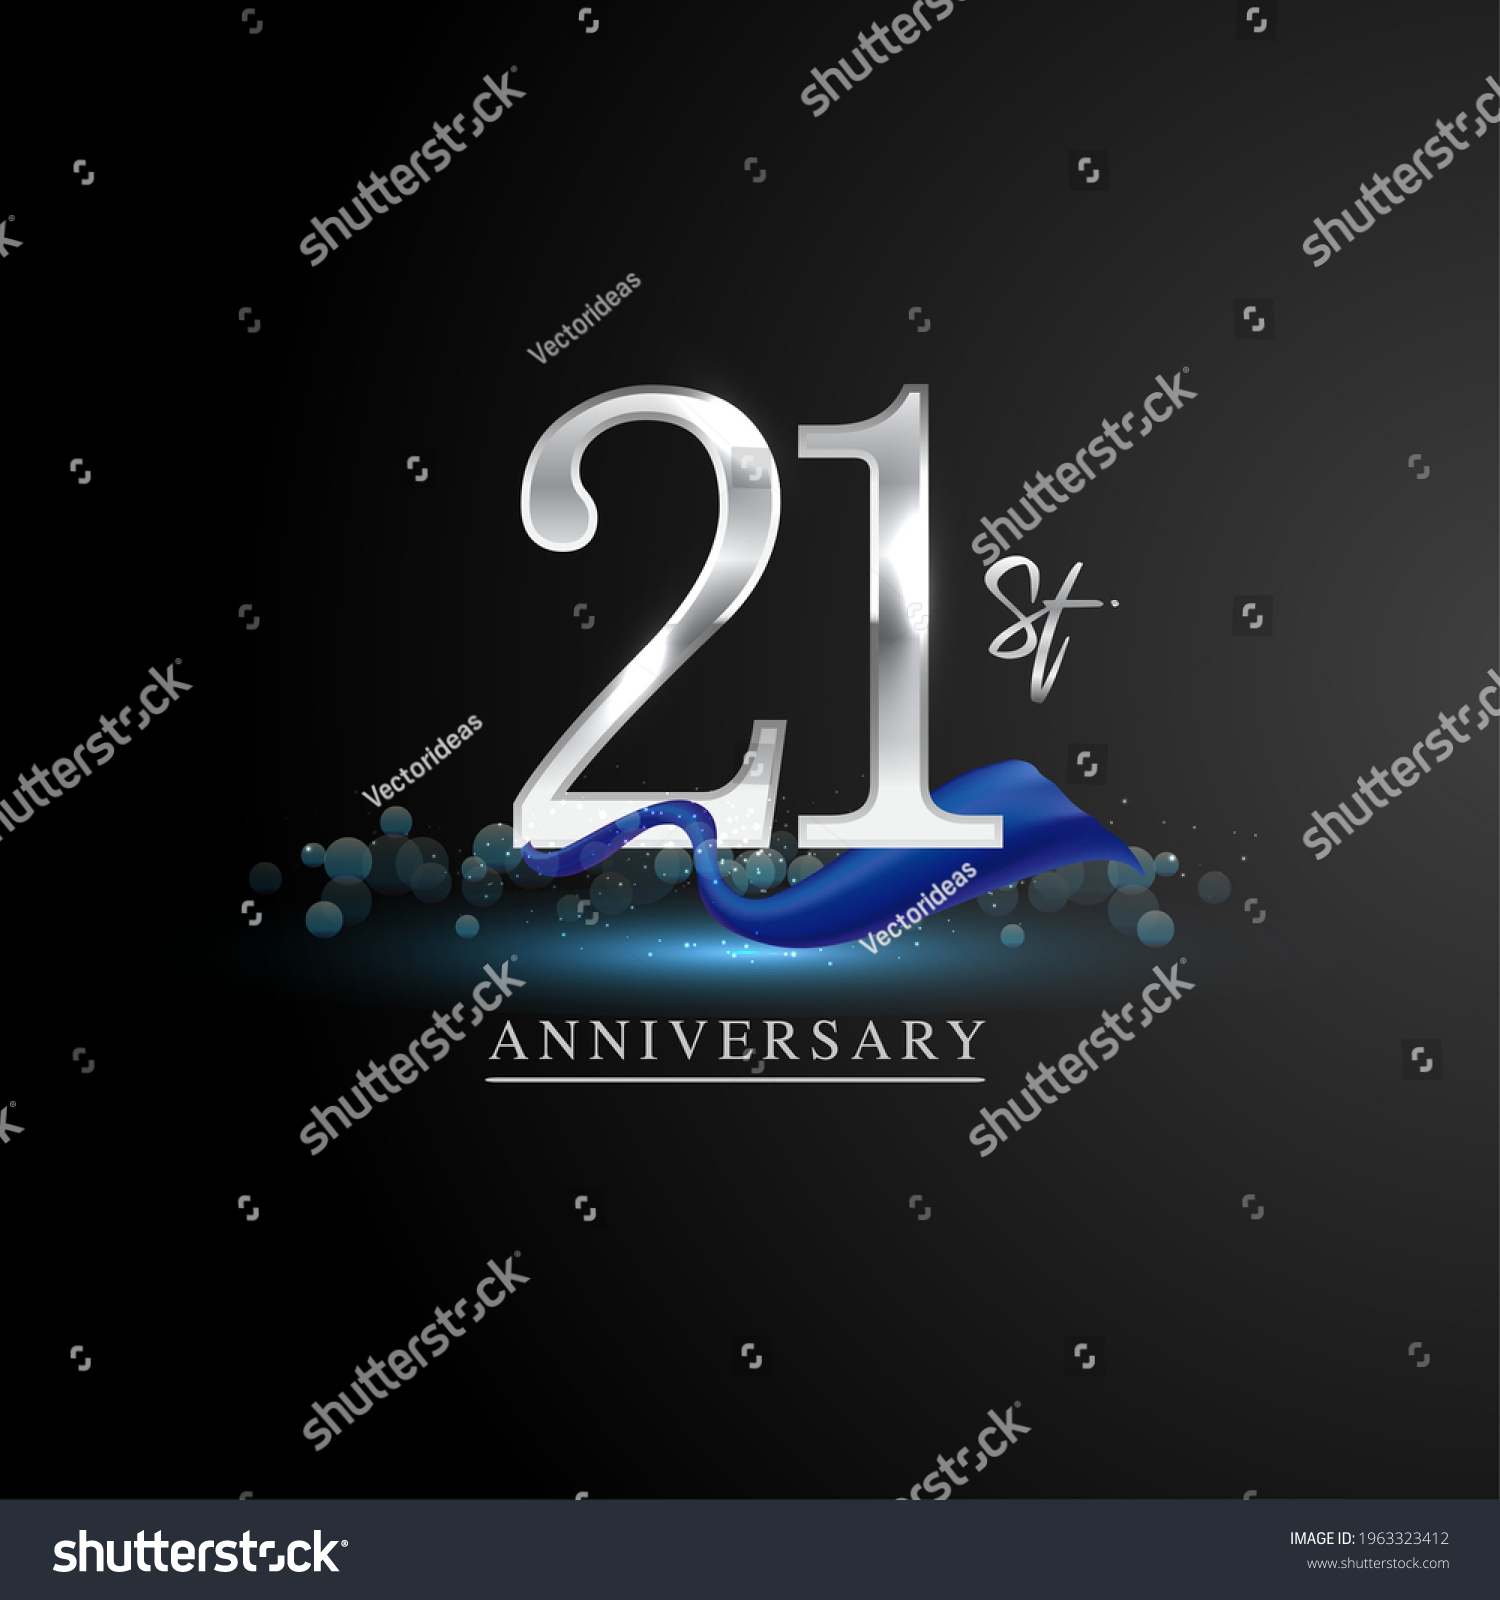 SVG of 21st silver anniversary logo with blue ribbon isolated on elegant background, sparkle, vector design for greeting card and invitation card. svg